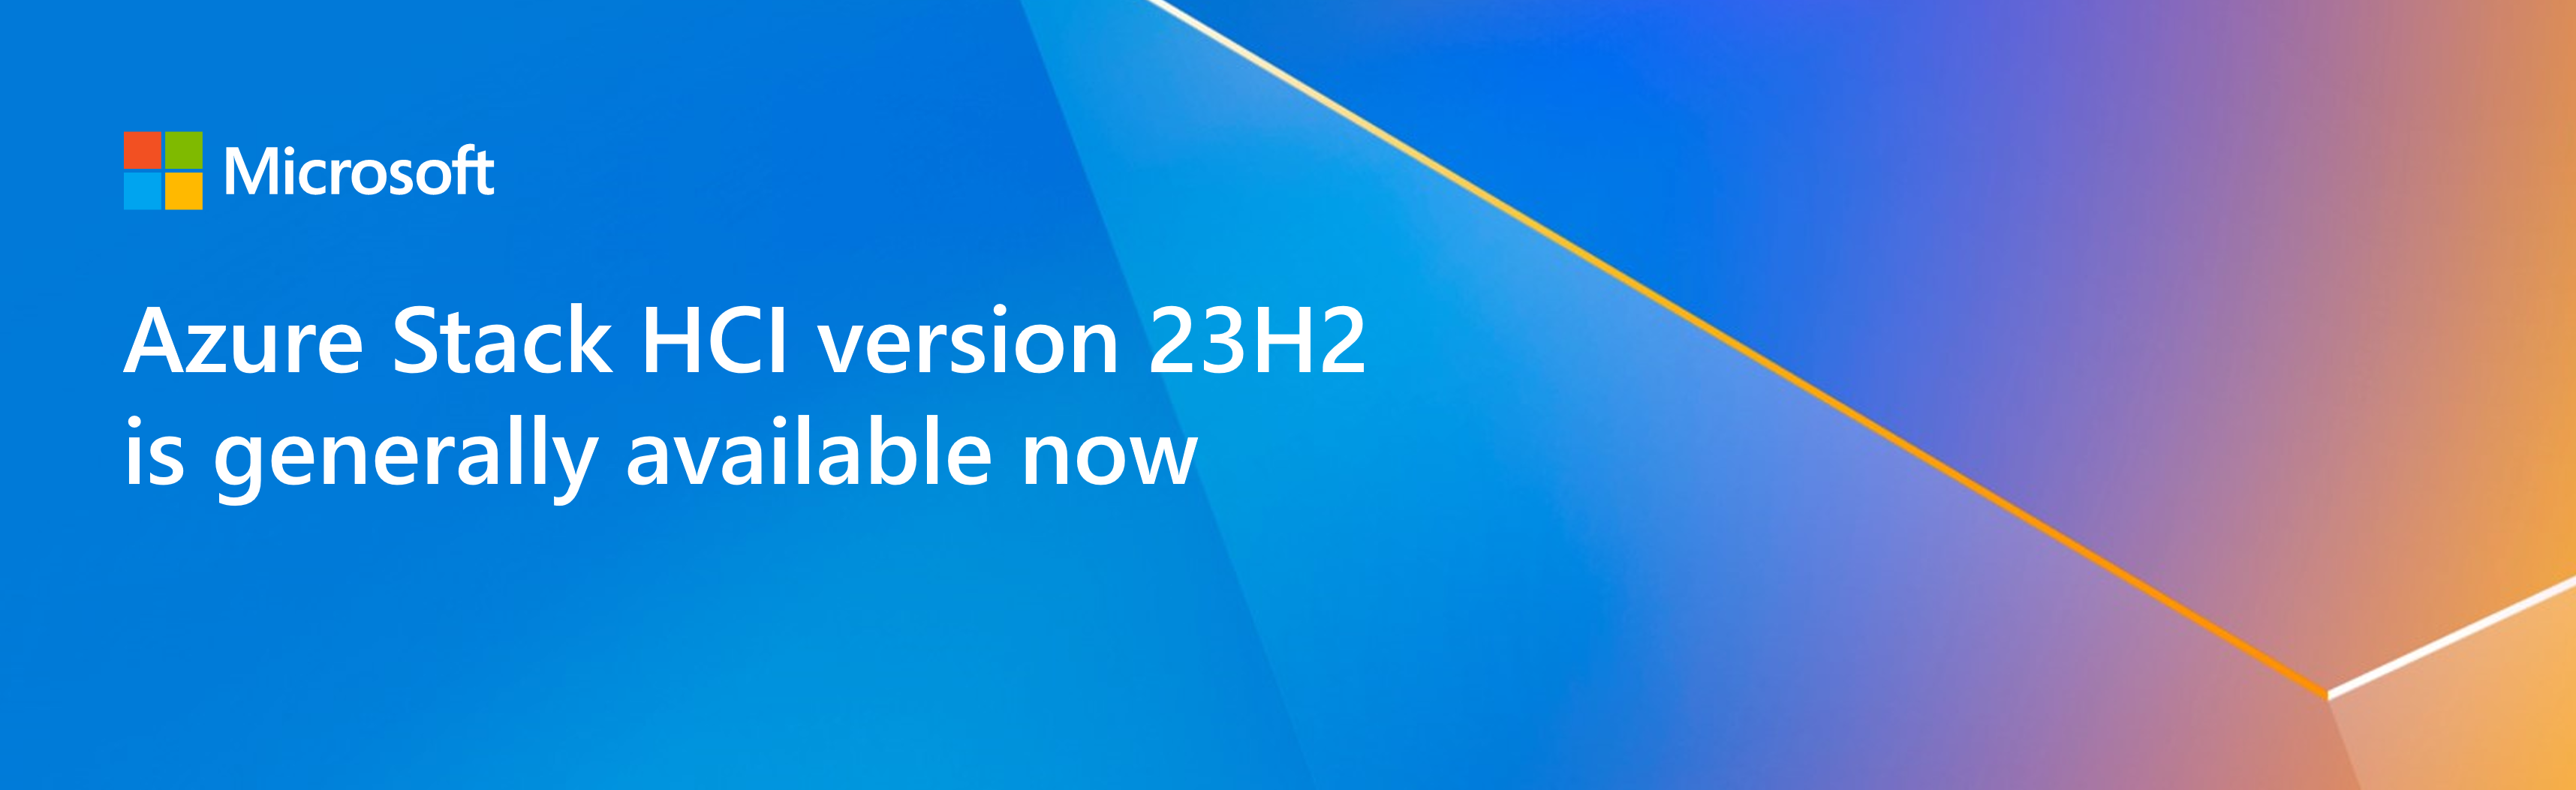 Azure Stack HCI version 23H2 is generally available